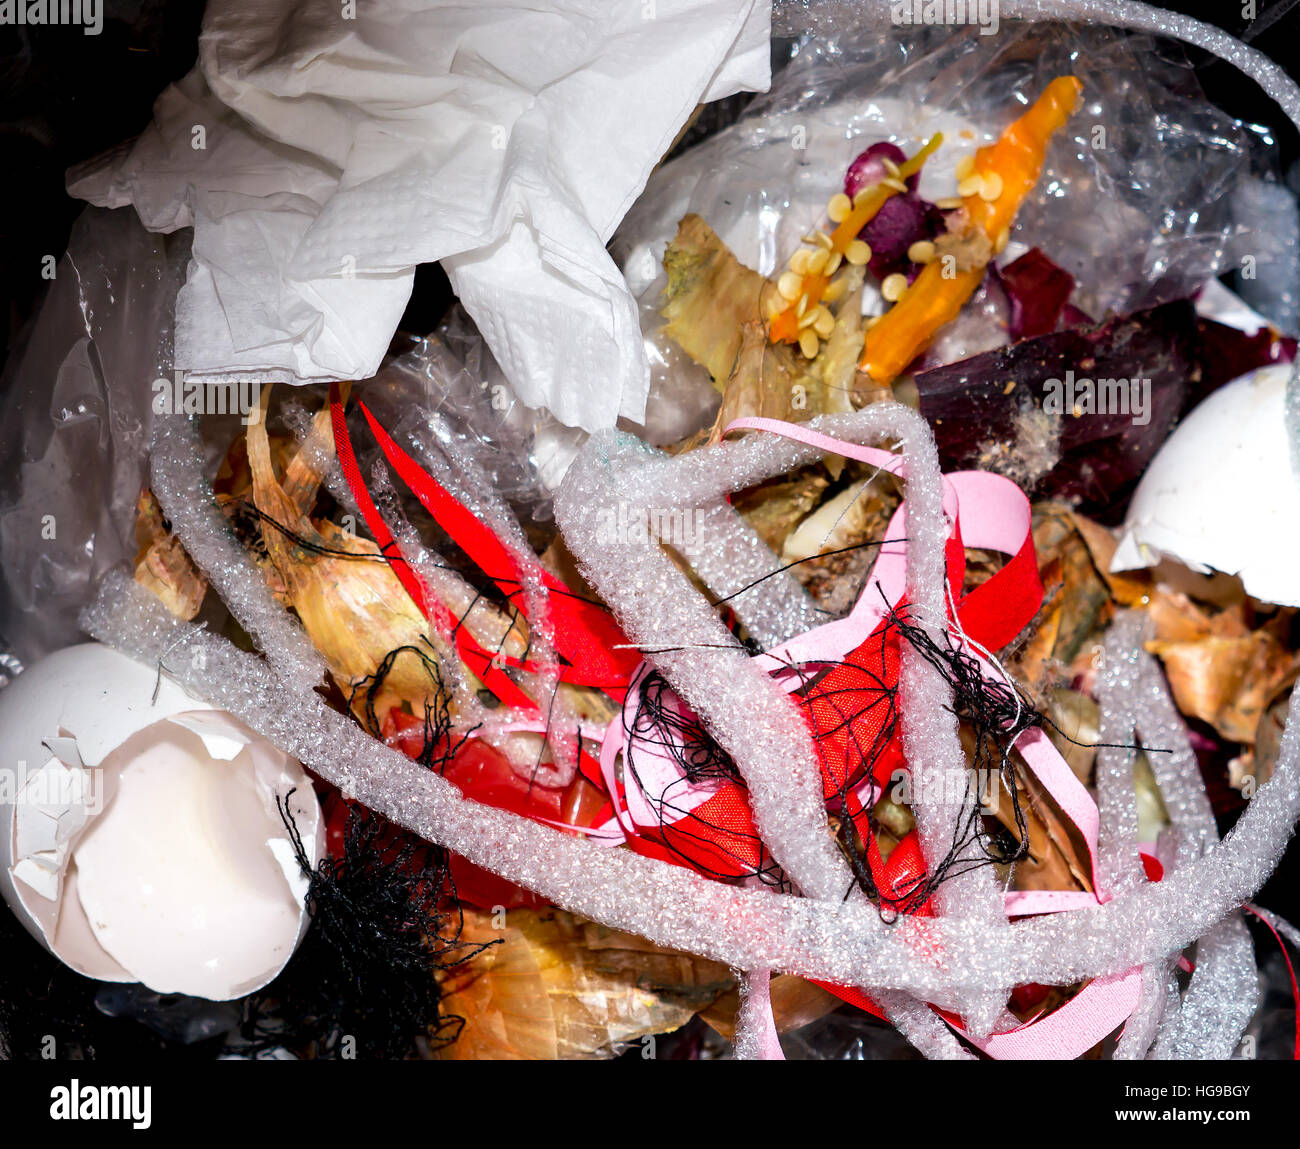 The food garbage texture and objects. Stock Photo